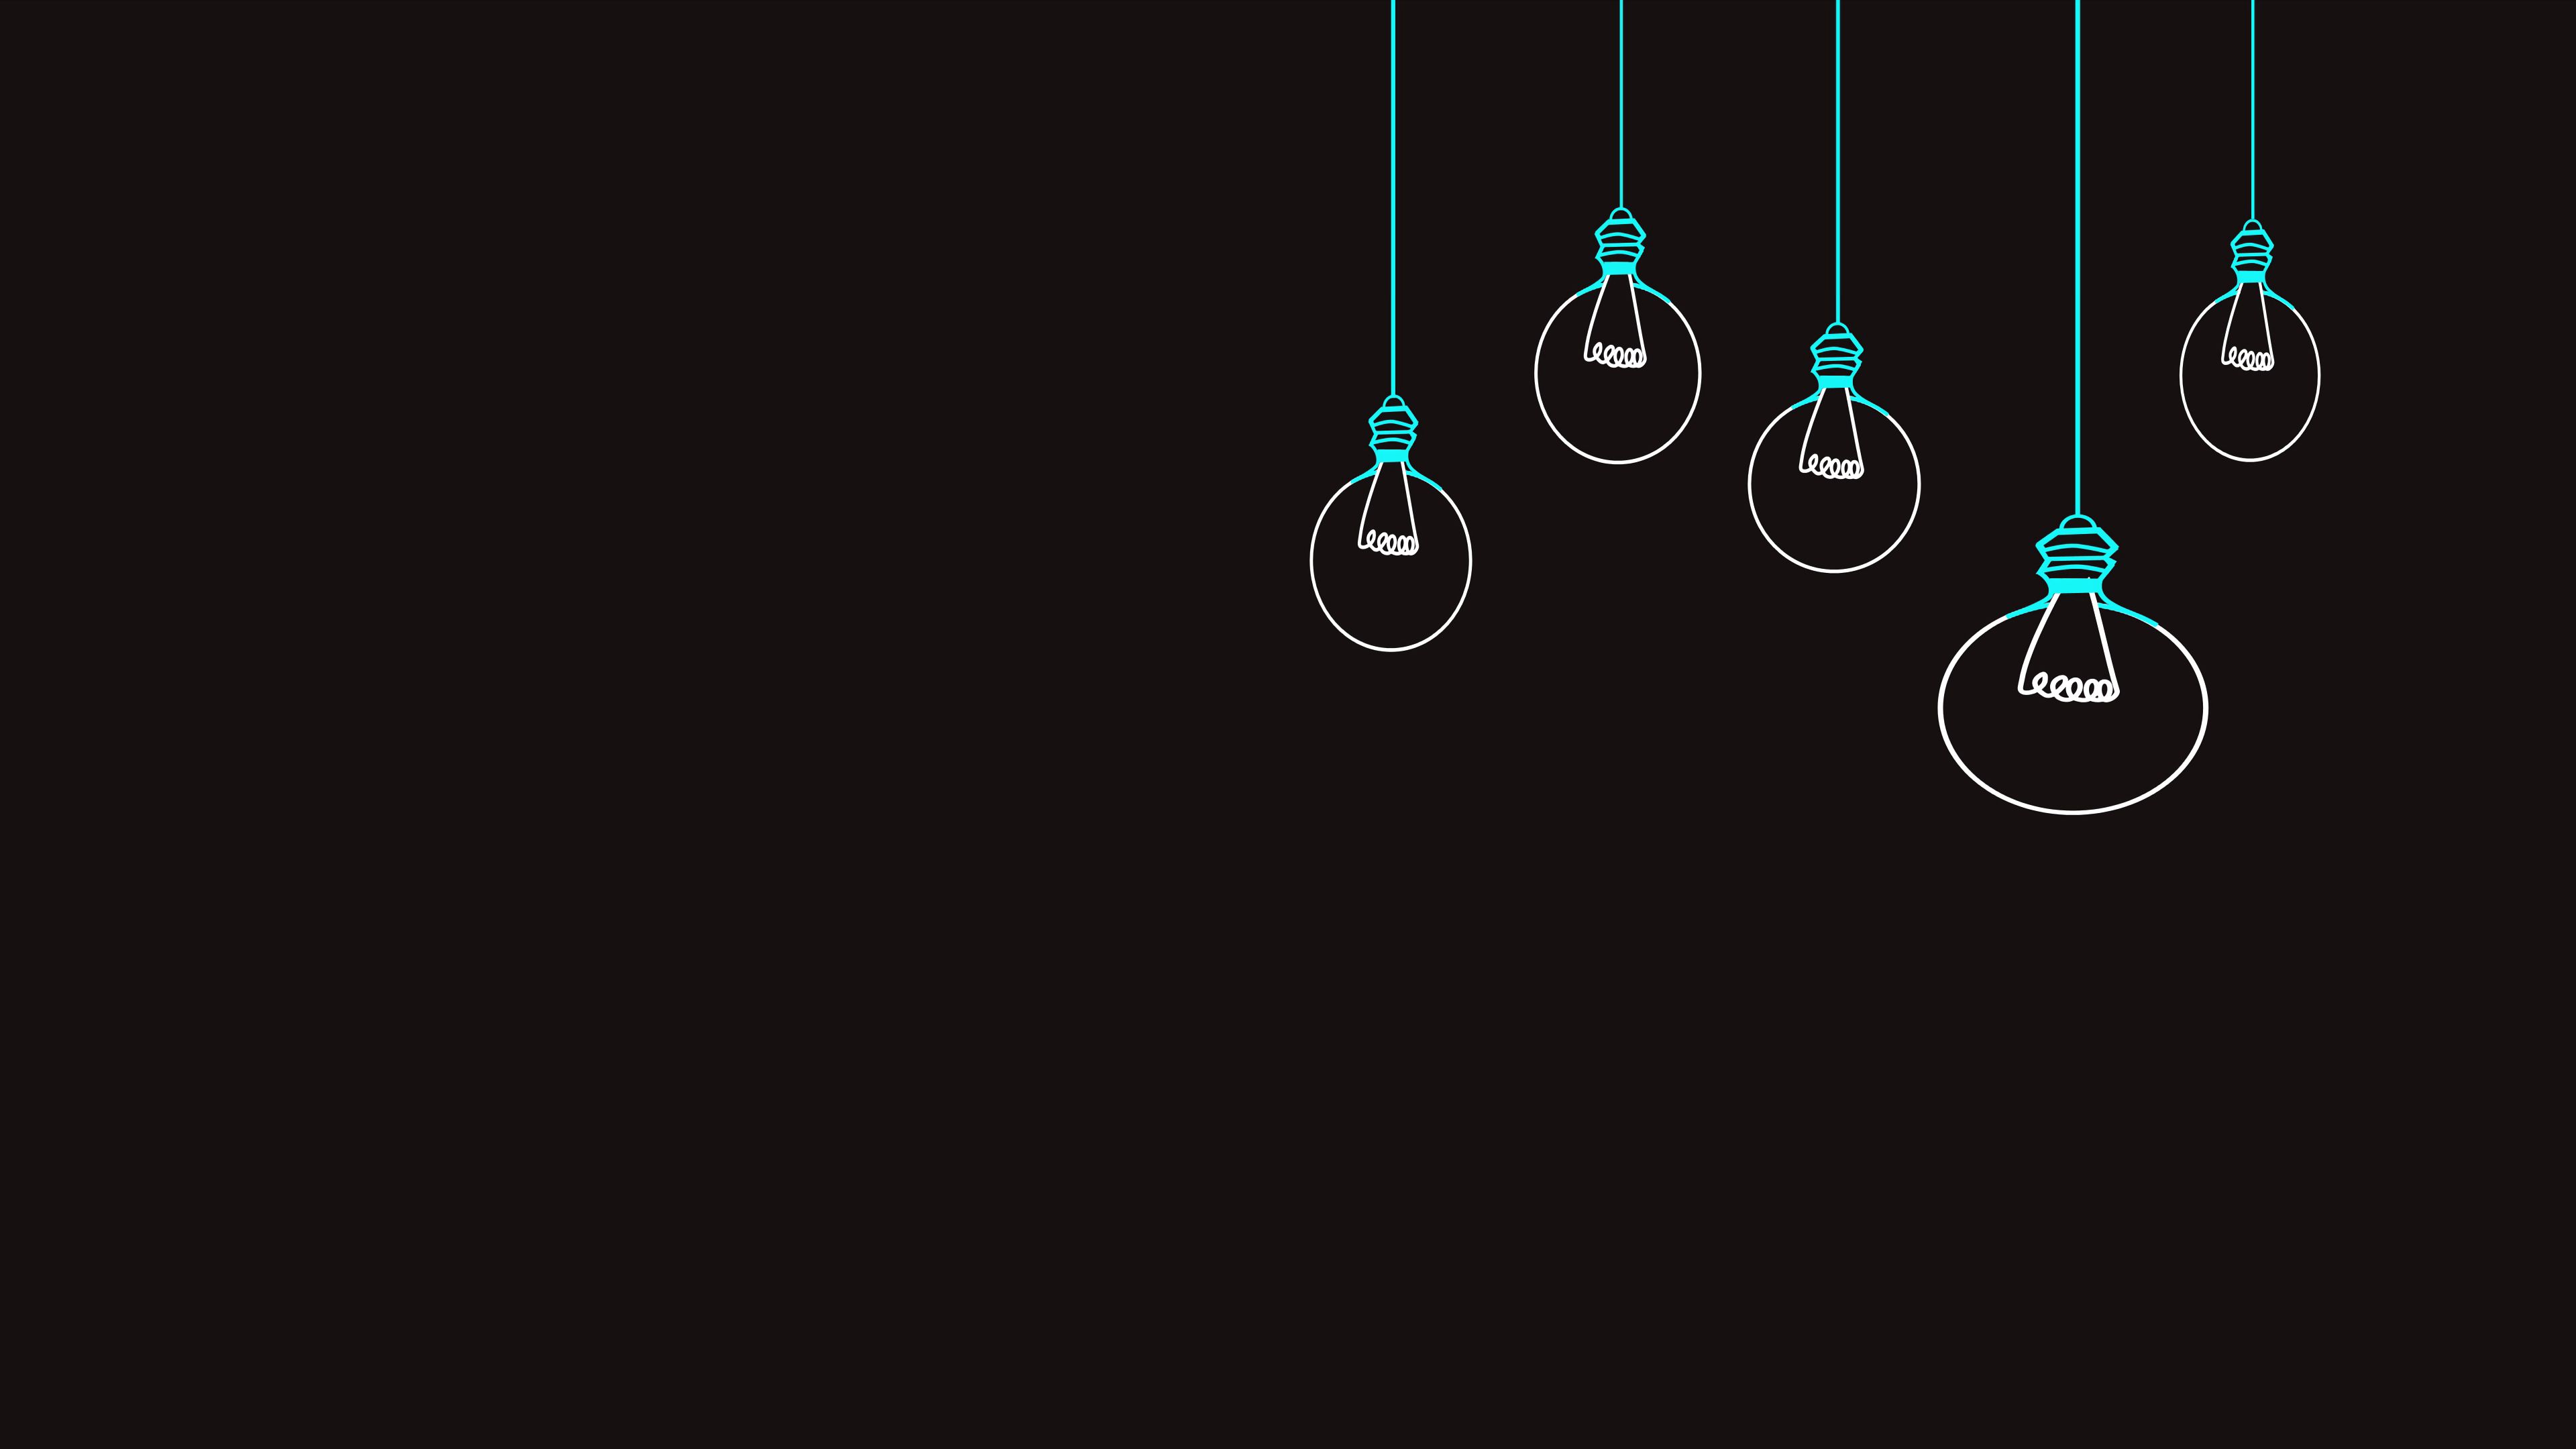 120051 download wallpaper vector, black background, minimalism, picture, drawing, light bulbs screensavers and pictures for free